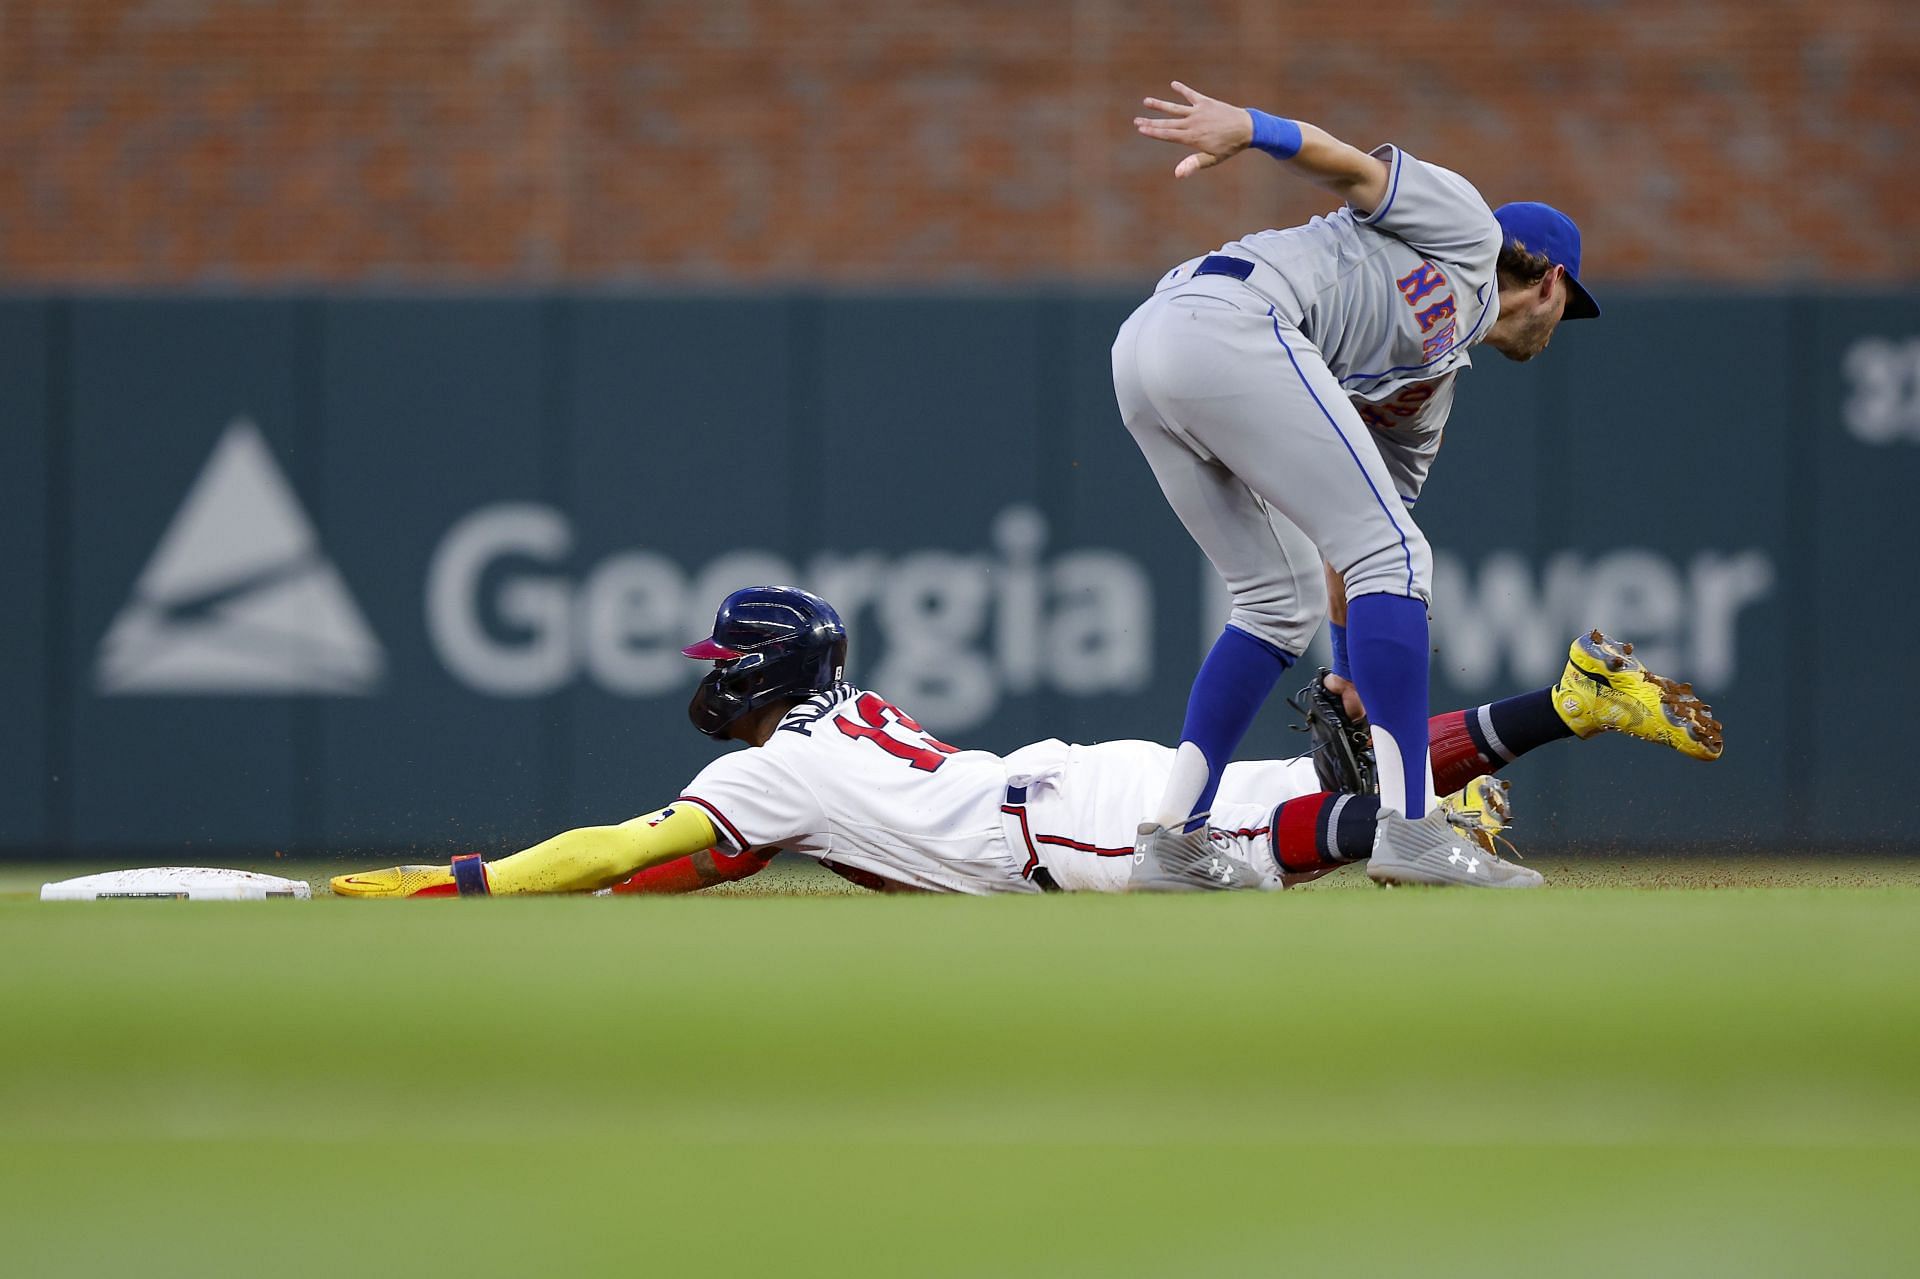 Ronald Acuna Jr. of the Atlanta Braves is tagged out by Jeff McNeil of the New York Mets at Truist Park